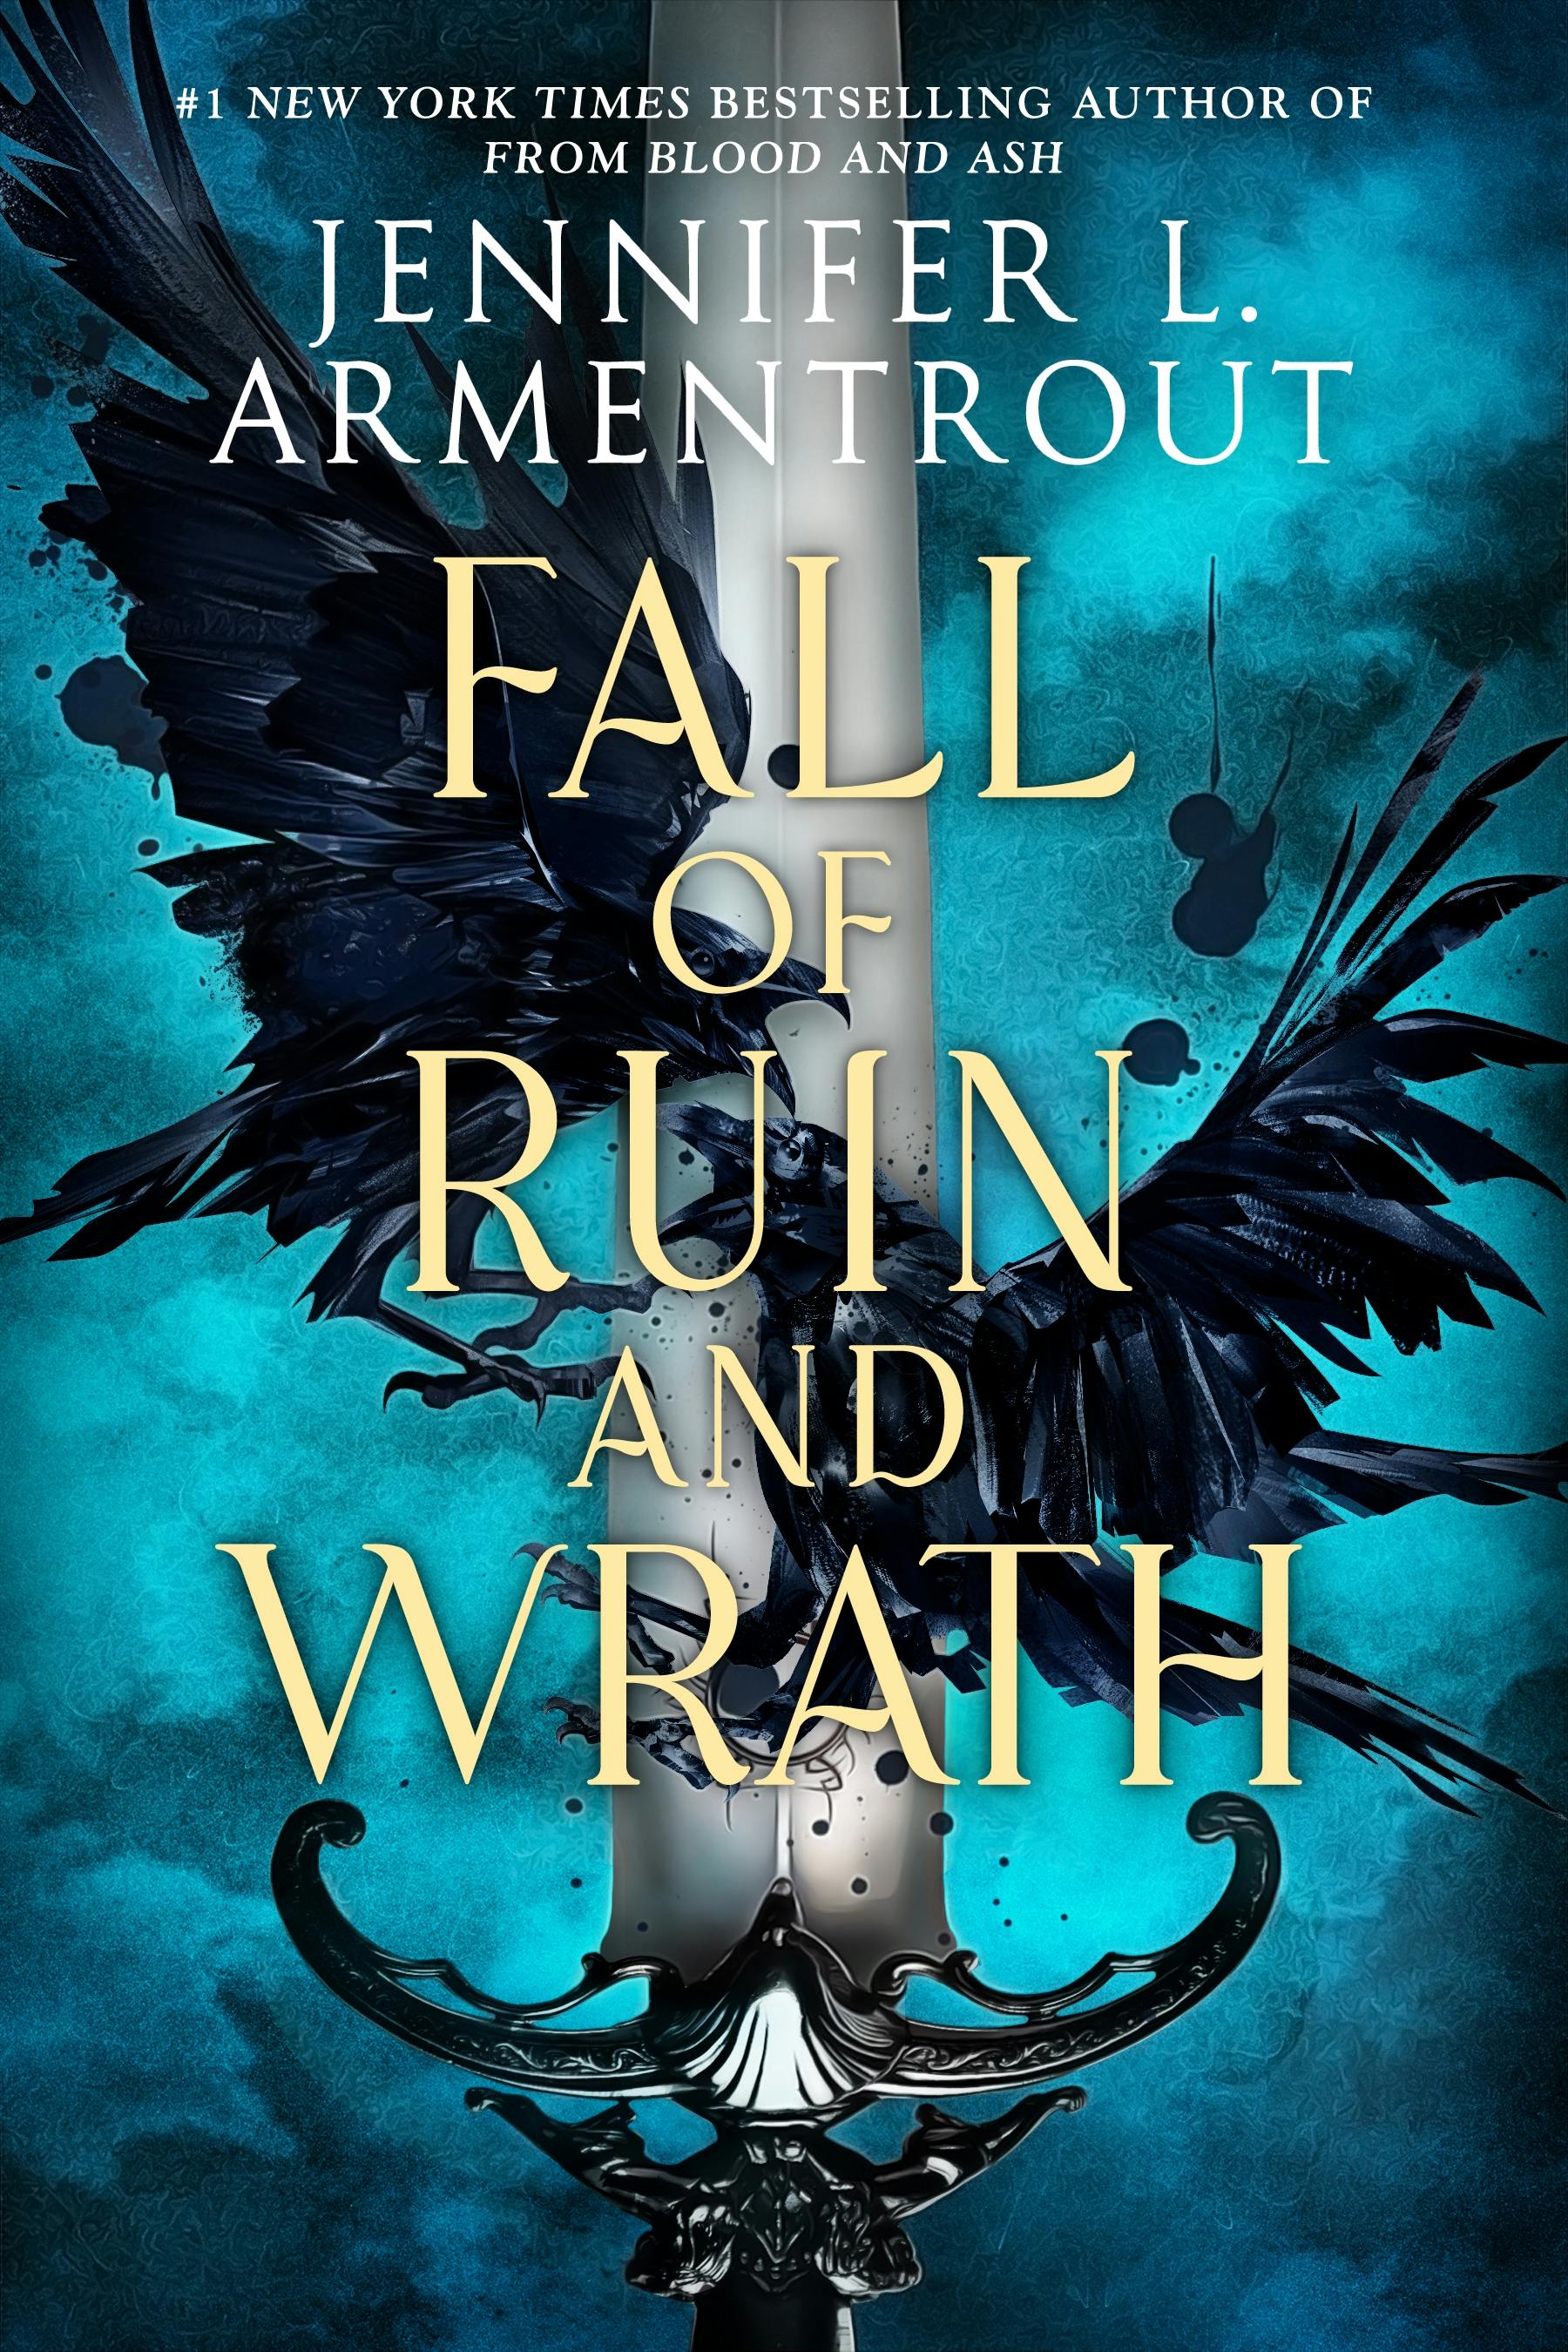 Cover for the book titled as: Fall of Ruin and Wrath